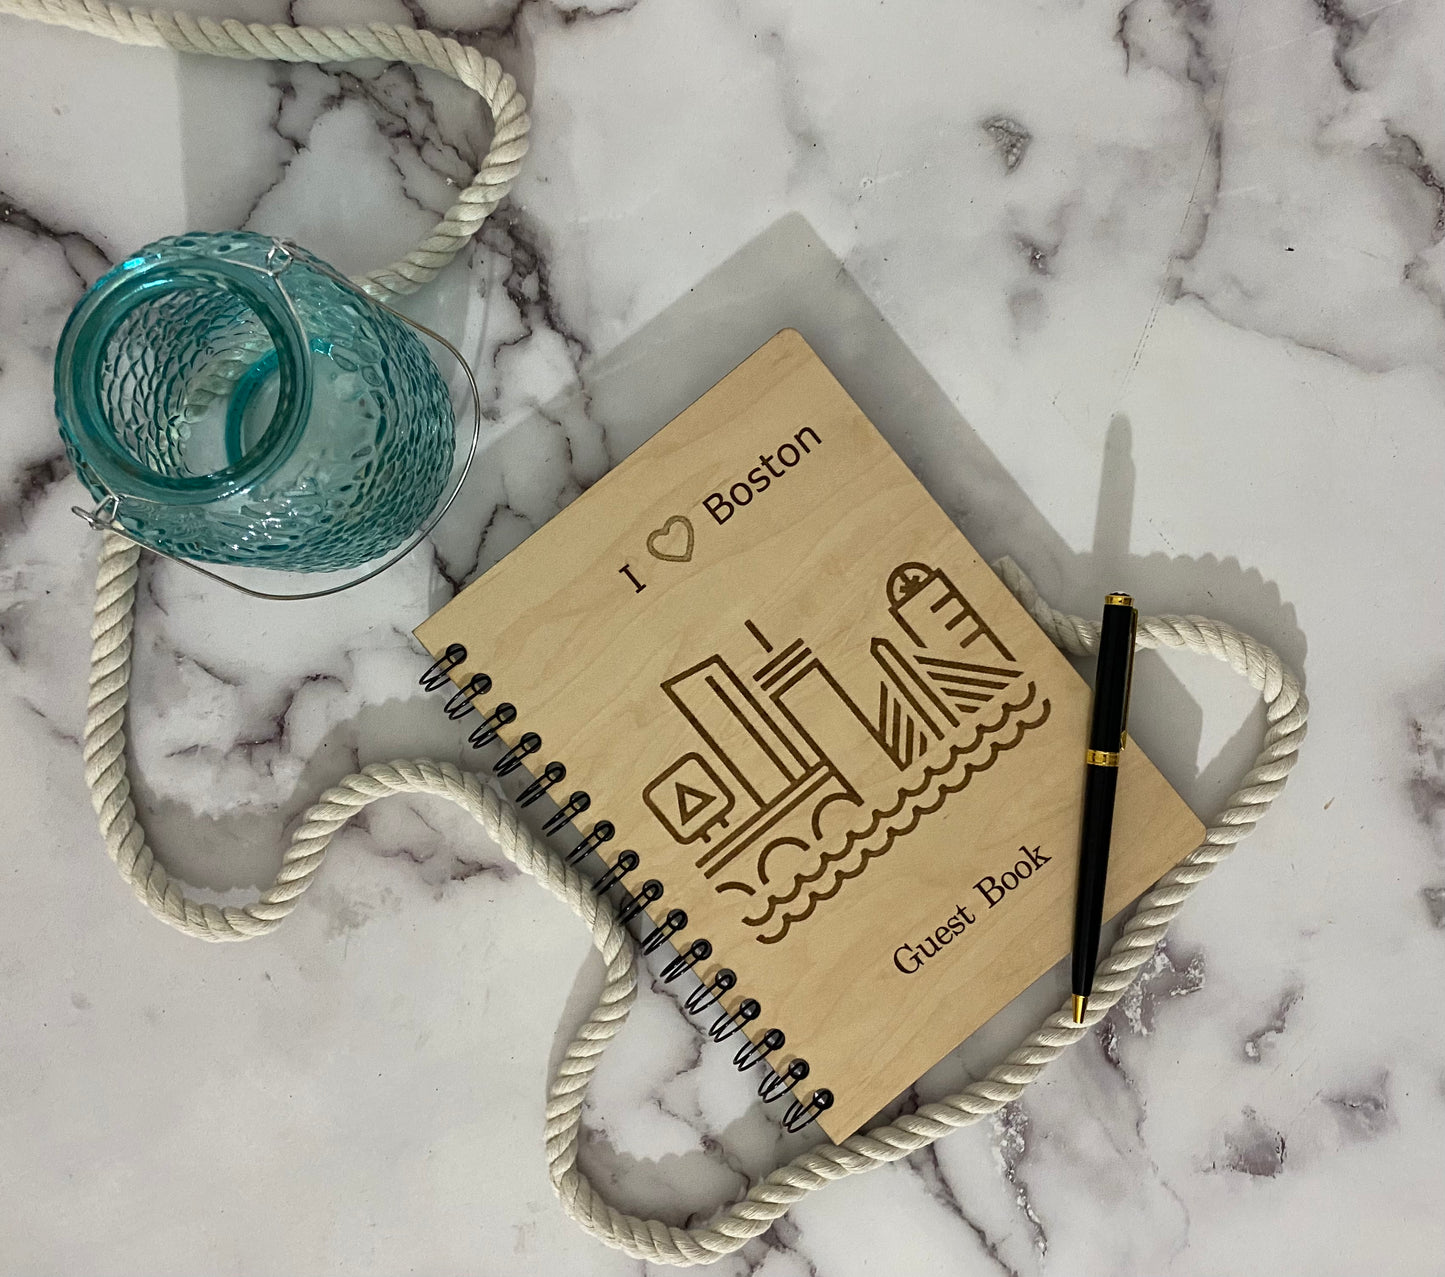 Personalized, Branded Guest Book for Airbnbs, VRBOs, Short-term rentals, Events